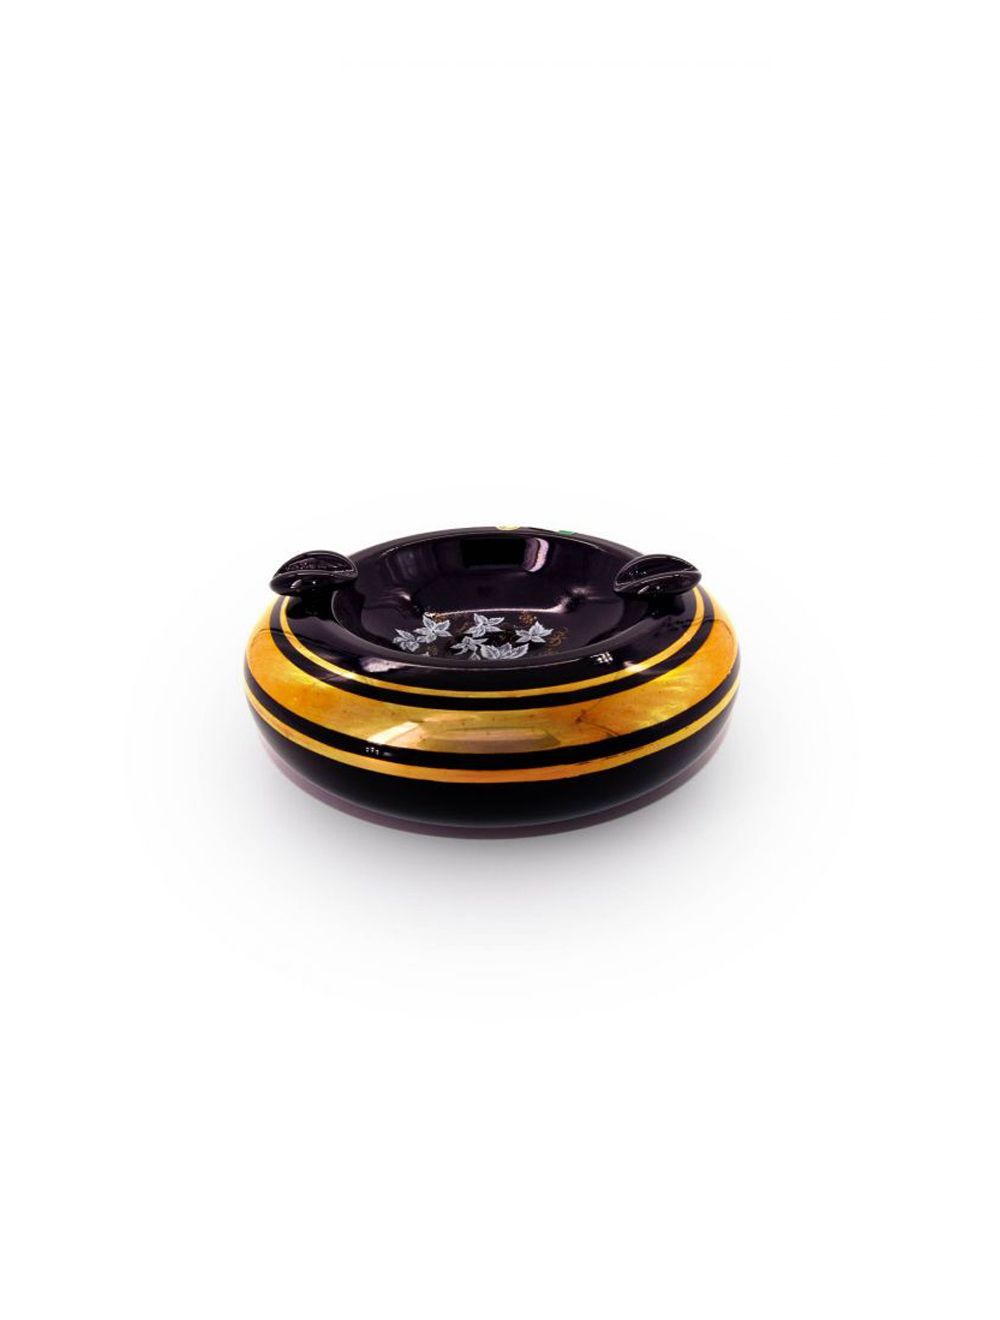 Ashtray Black With Golden Colored Round Design